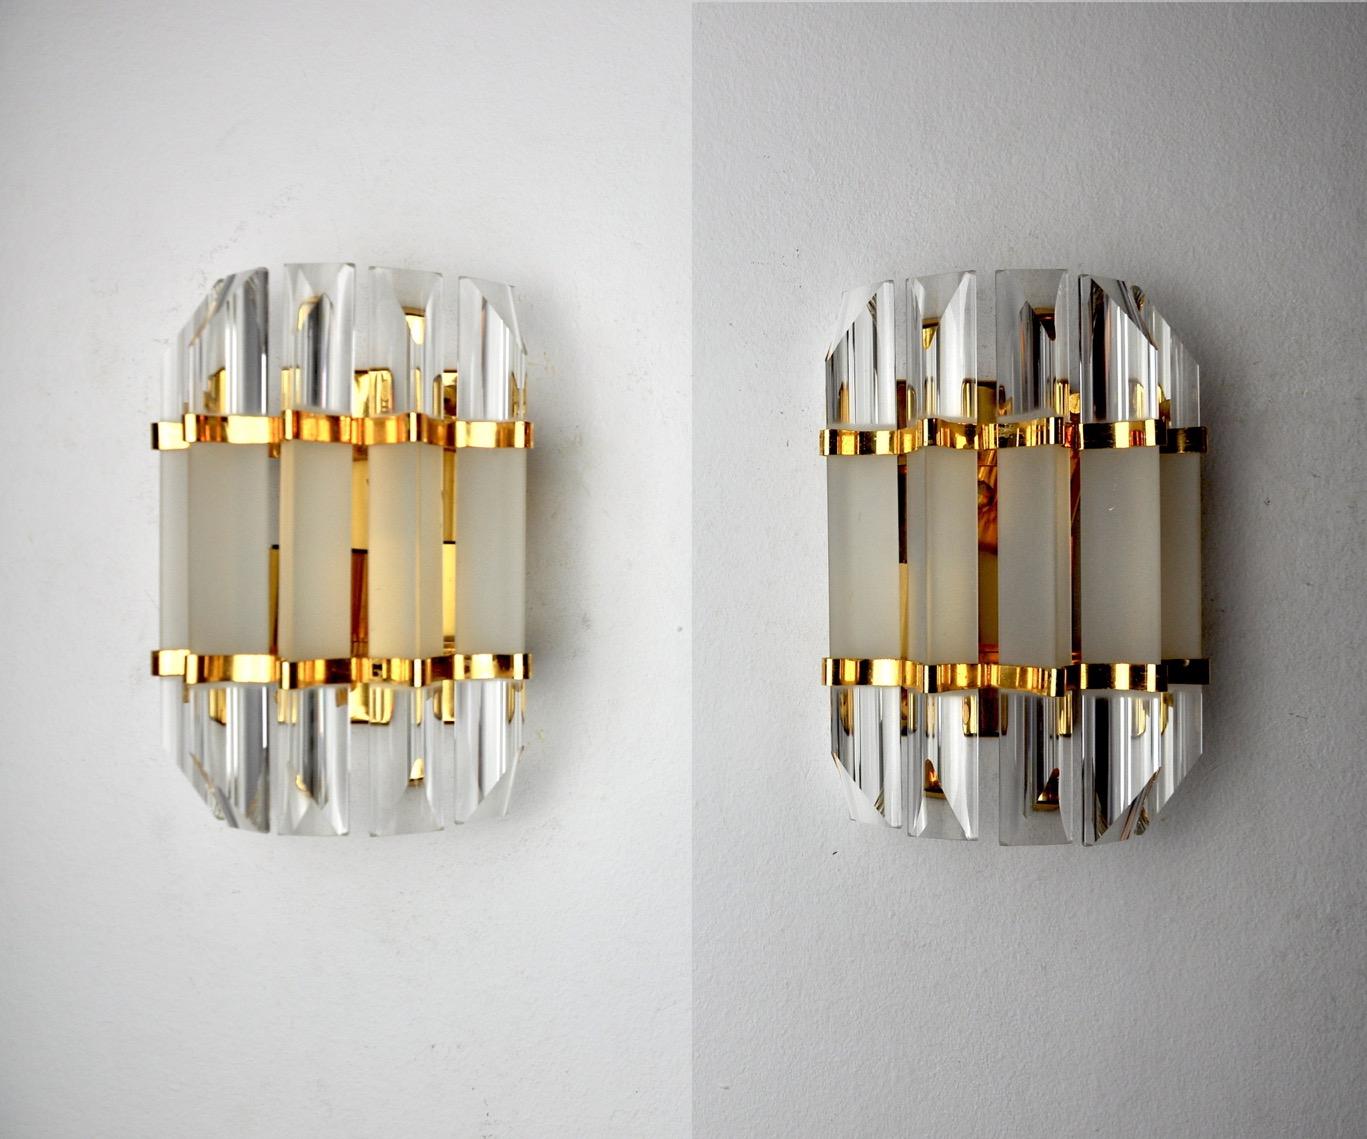 Very nice pair of venini wall lights produced in italy in the 70s. Cut glass and gilt metal structure. Unique object that will illuminate wonderfully and bring a real design touch to your interior. Electricity checked, mark of time in accordance